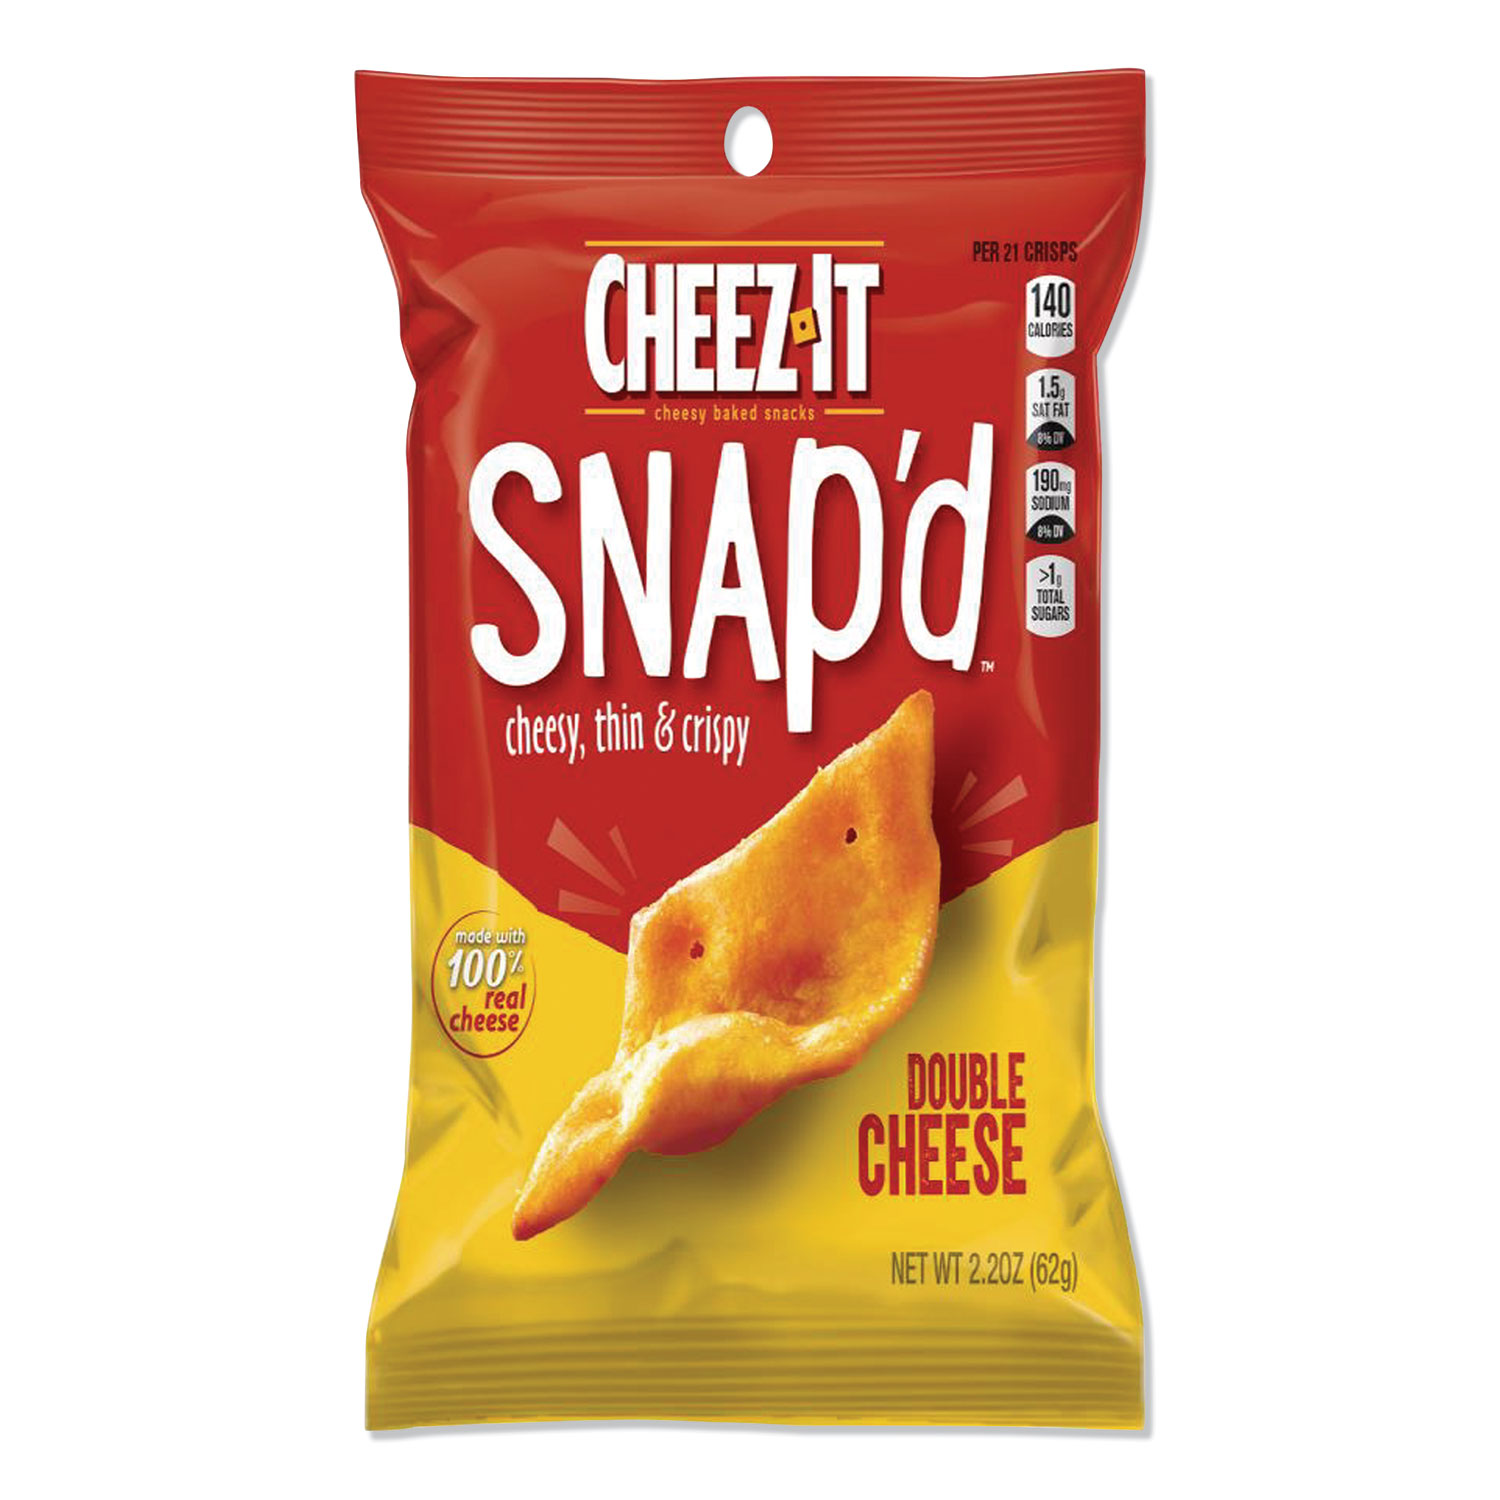 Sunshine® Cheez-it Snapd Crackers, Double Cheese, 2.2 oz Pouch, 6/Pack